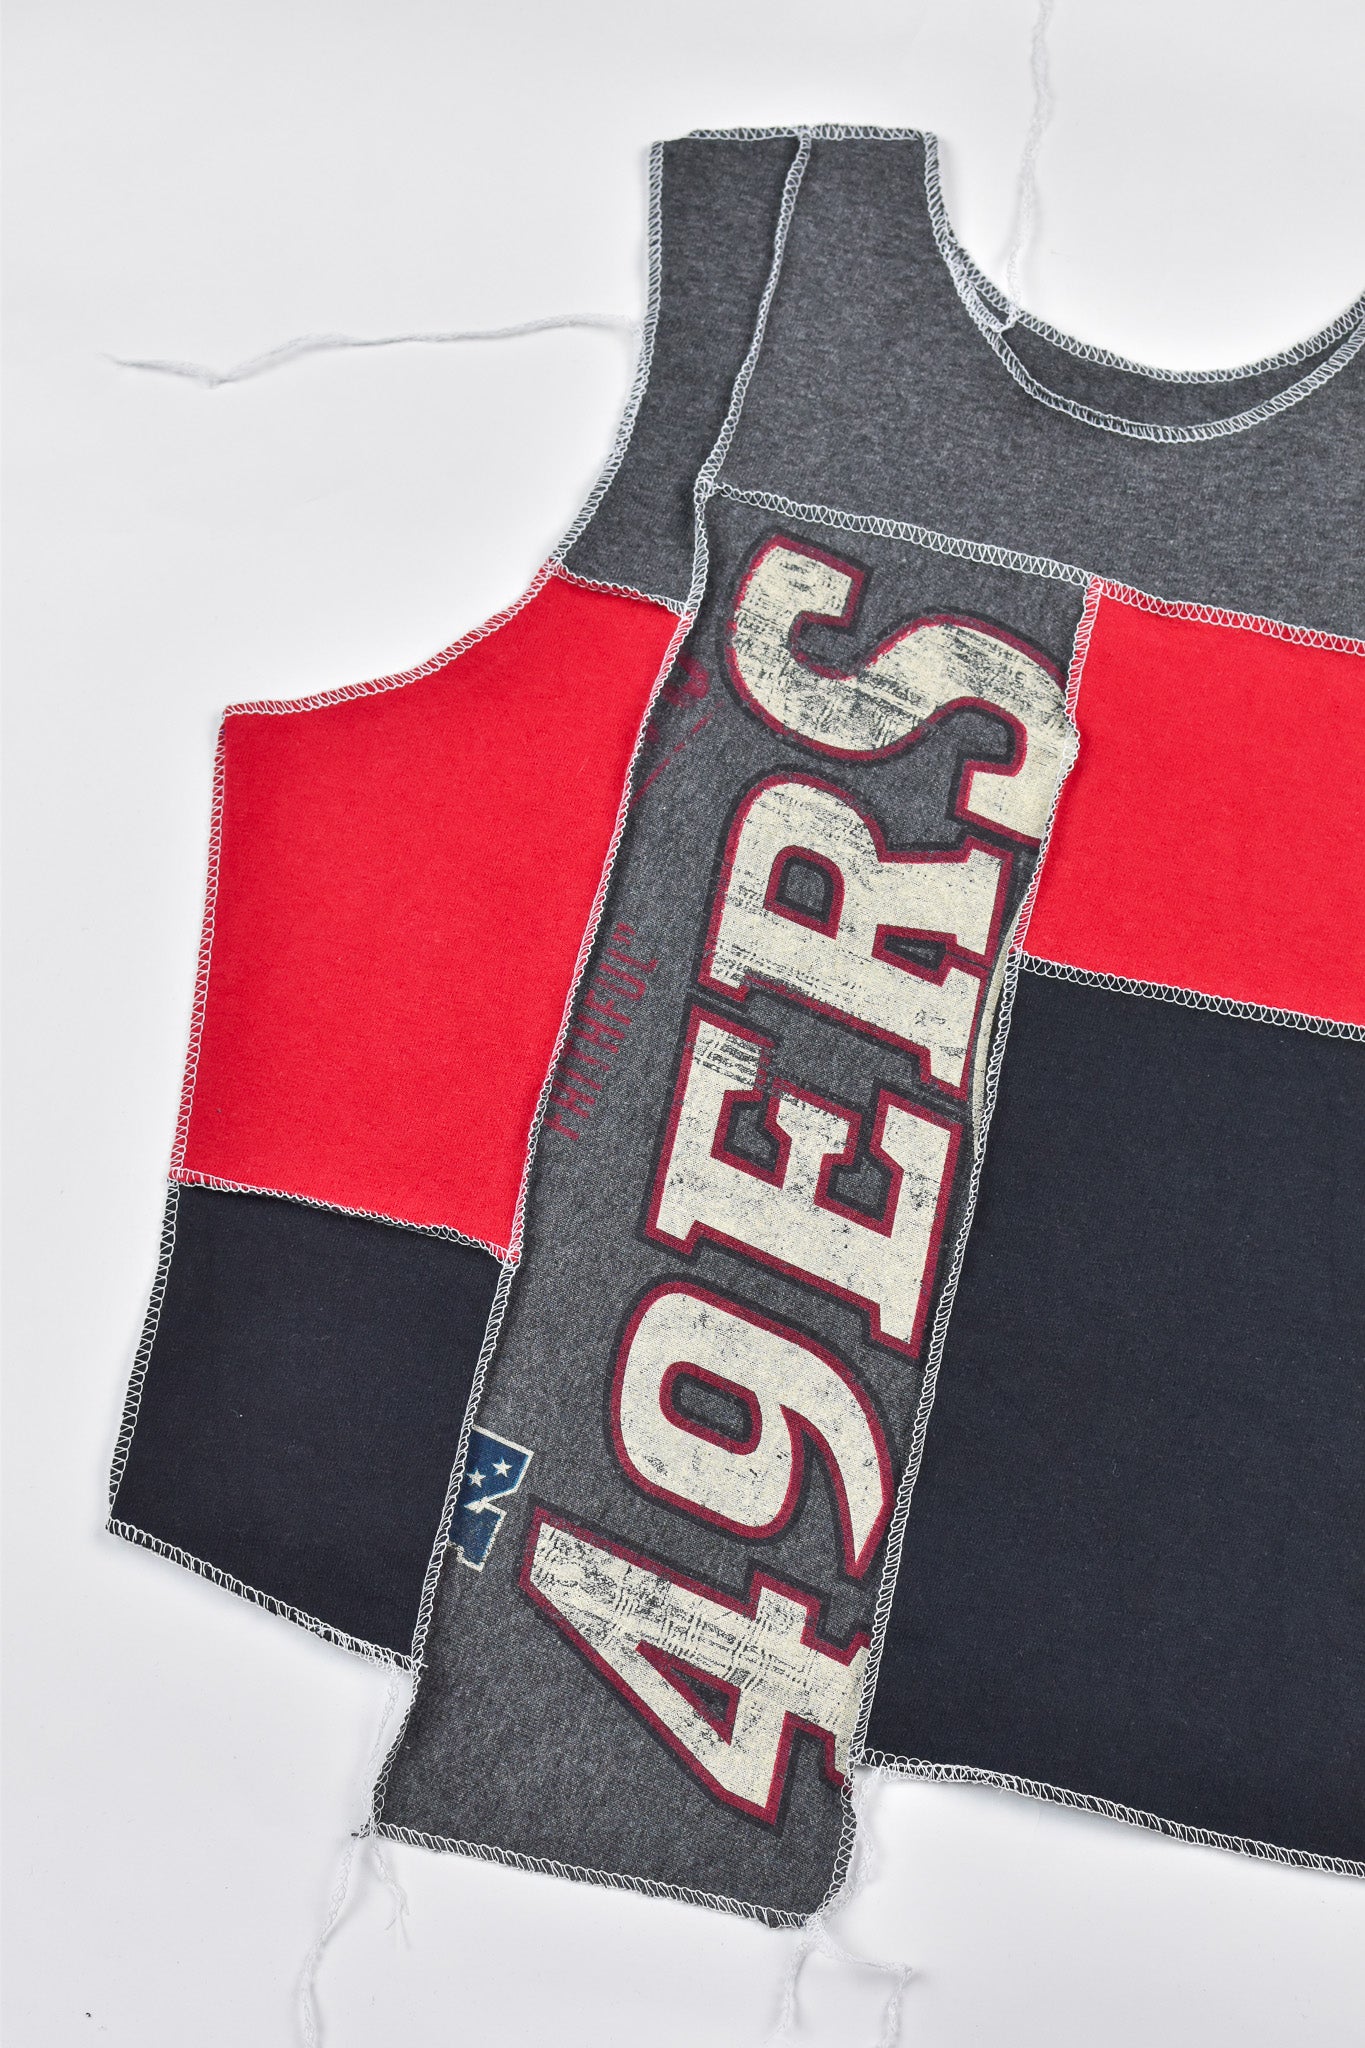 Upcycled 49ers Scrappy Tank Top